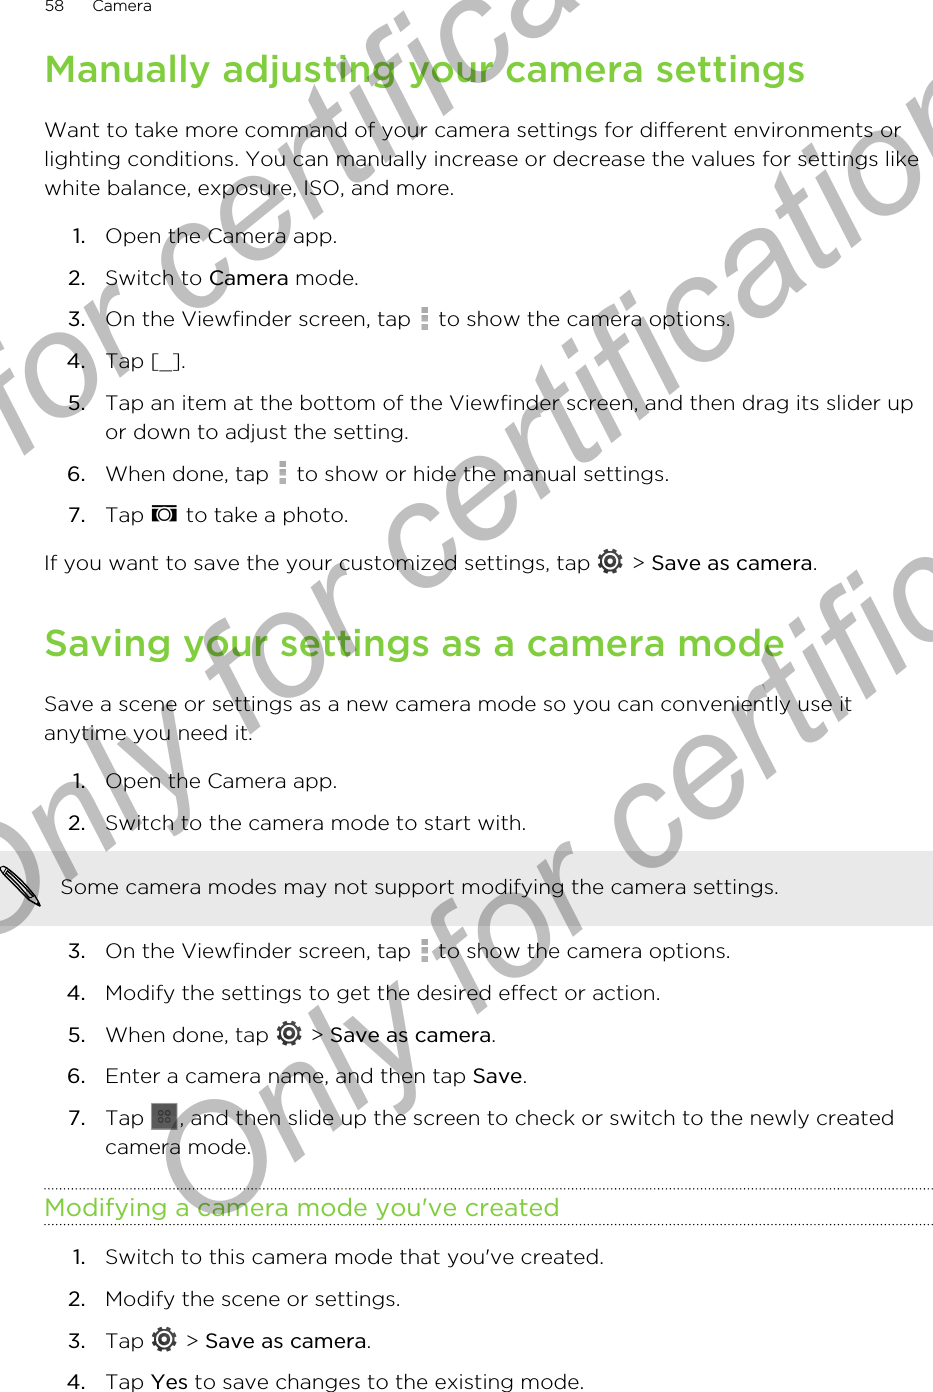 Manually adjusting your camera settingsWant to take more command of your camera settings for different environments orlighting conditions. You can manually increase or decrease the values for settings likewhite balance, exposure, ISO, and more.1. Open the Camera app.2. Switch to Camera mode.3. On the Viewfinder screen, tap   to show the camera options.4. Tap [_].5. Tap an item at the bottom of the Viewfinder screen, and then drag its slider upor down to adjust the setting.6. When done, tap   to show or hide the manual settings.7. Tap   to take a photo.If you want to save the your customized settings, tap   &gt; Save as camera.Saving your settings as a camera modeSave a scene or settings as a new camera mode so you can conveniently use itanytime you need it.1. Open the Camera app.2. Switch to the camera mode to start with. Some camera modes may not support modifying the camera settings.3. On the Viewfinder screen, tap   to show the camera options.4. Modify the settings to get the desired effect or action.5. When done, tap   &gt; Save as camera.6. Enter a camera name, and then tap Save.7. Tap  , and then slide up the screen to check or switch to the newly createdcamera mode.Modifying a camera mode you&apos;ve created1. Switch to this camera mode that you&apos;ve created.2. Modify the scene or settings.3. Tap   &gt; Save as camera.4. Tap Yes to save changes to the existing mode.58 CameraOnly for certification  Only for certification  Only for certification